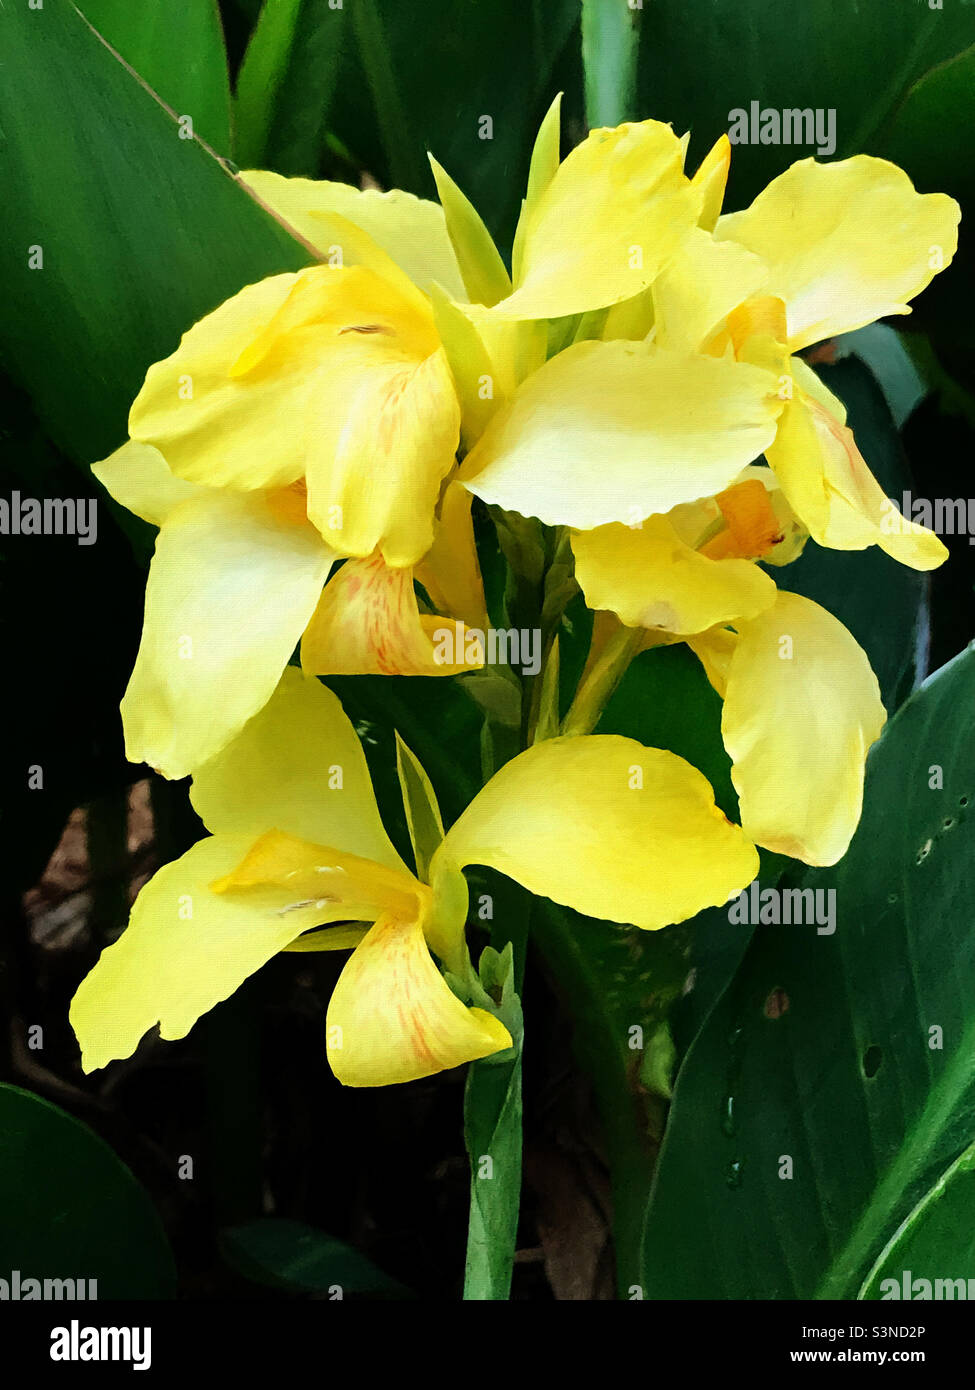 Beautiful yellow colored canna lily flower blossoms. Artistic effects. Stock Photo